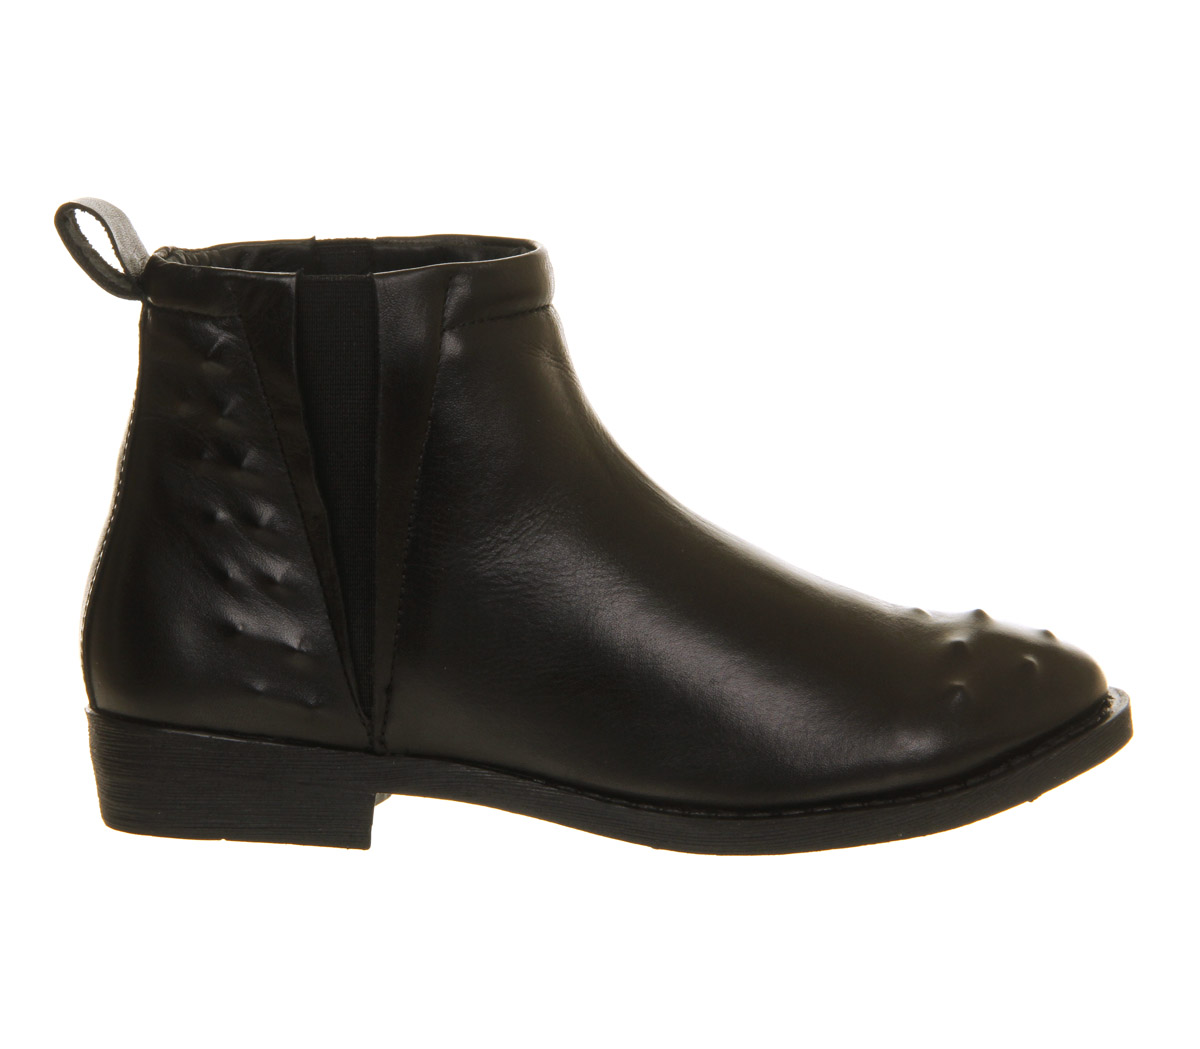 Friis & Co Anette Ankle Boot Black Leather - Women's Ankle Boots